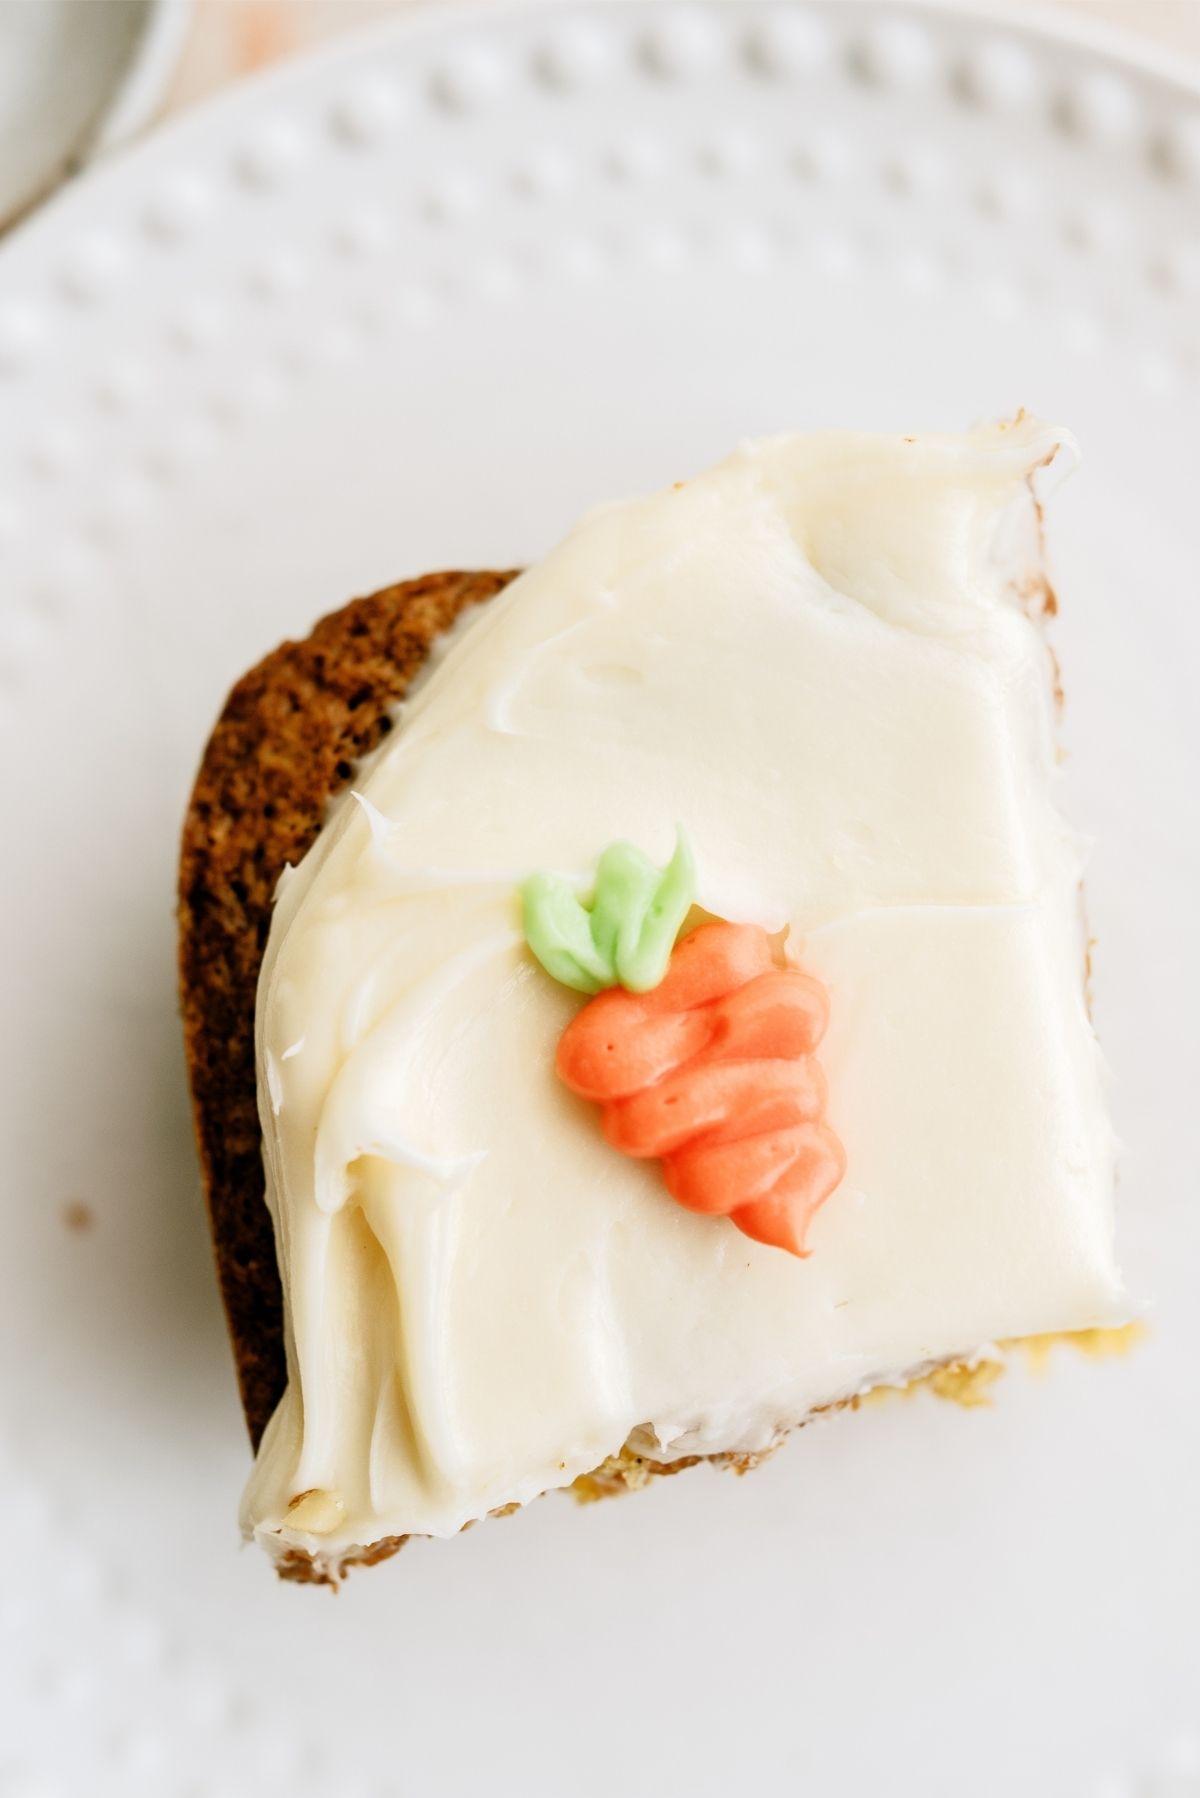 A slice of the Best Carrot Cake on a plate, frosted